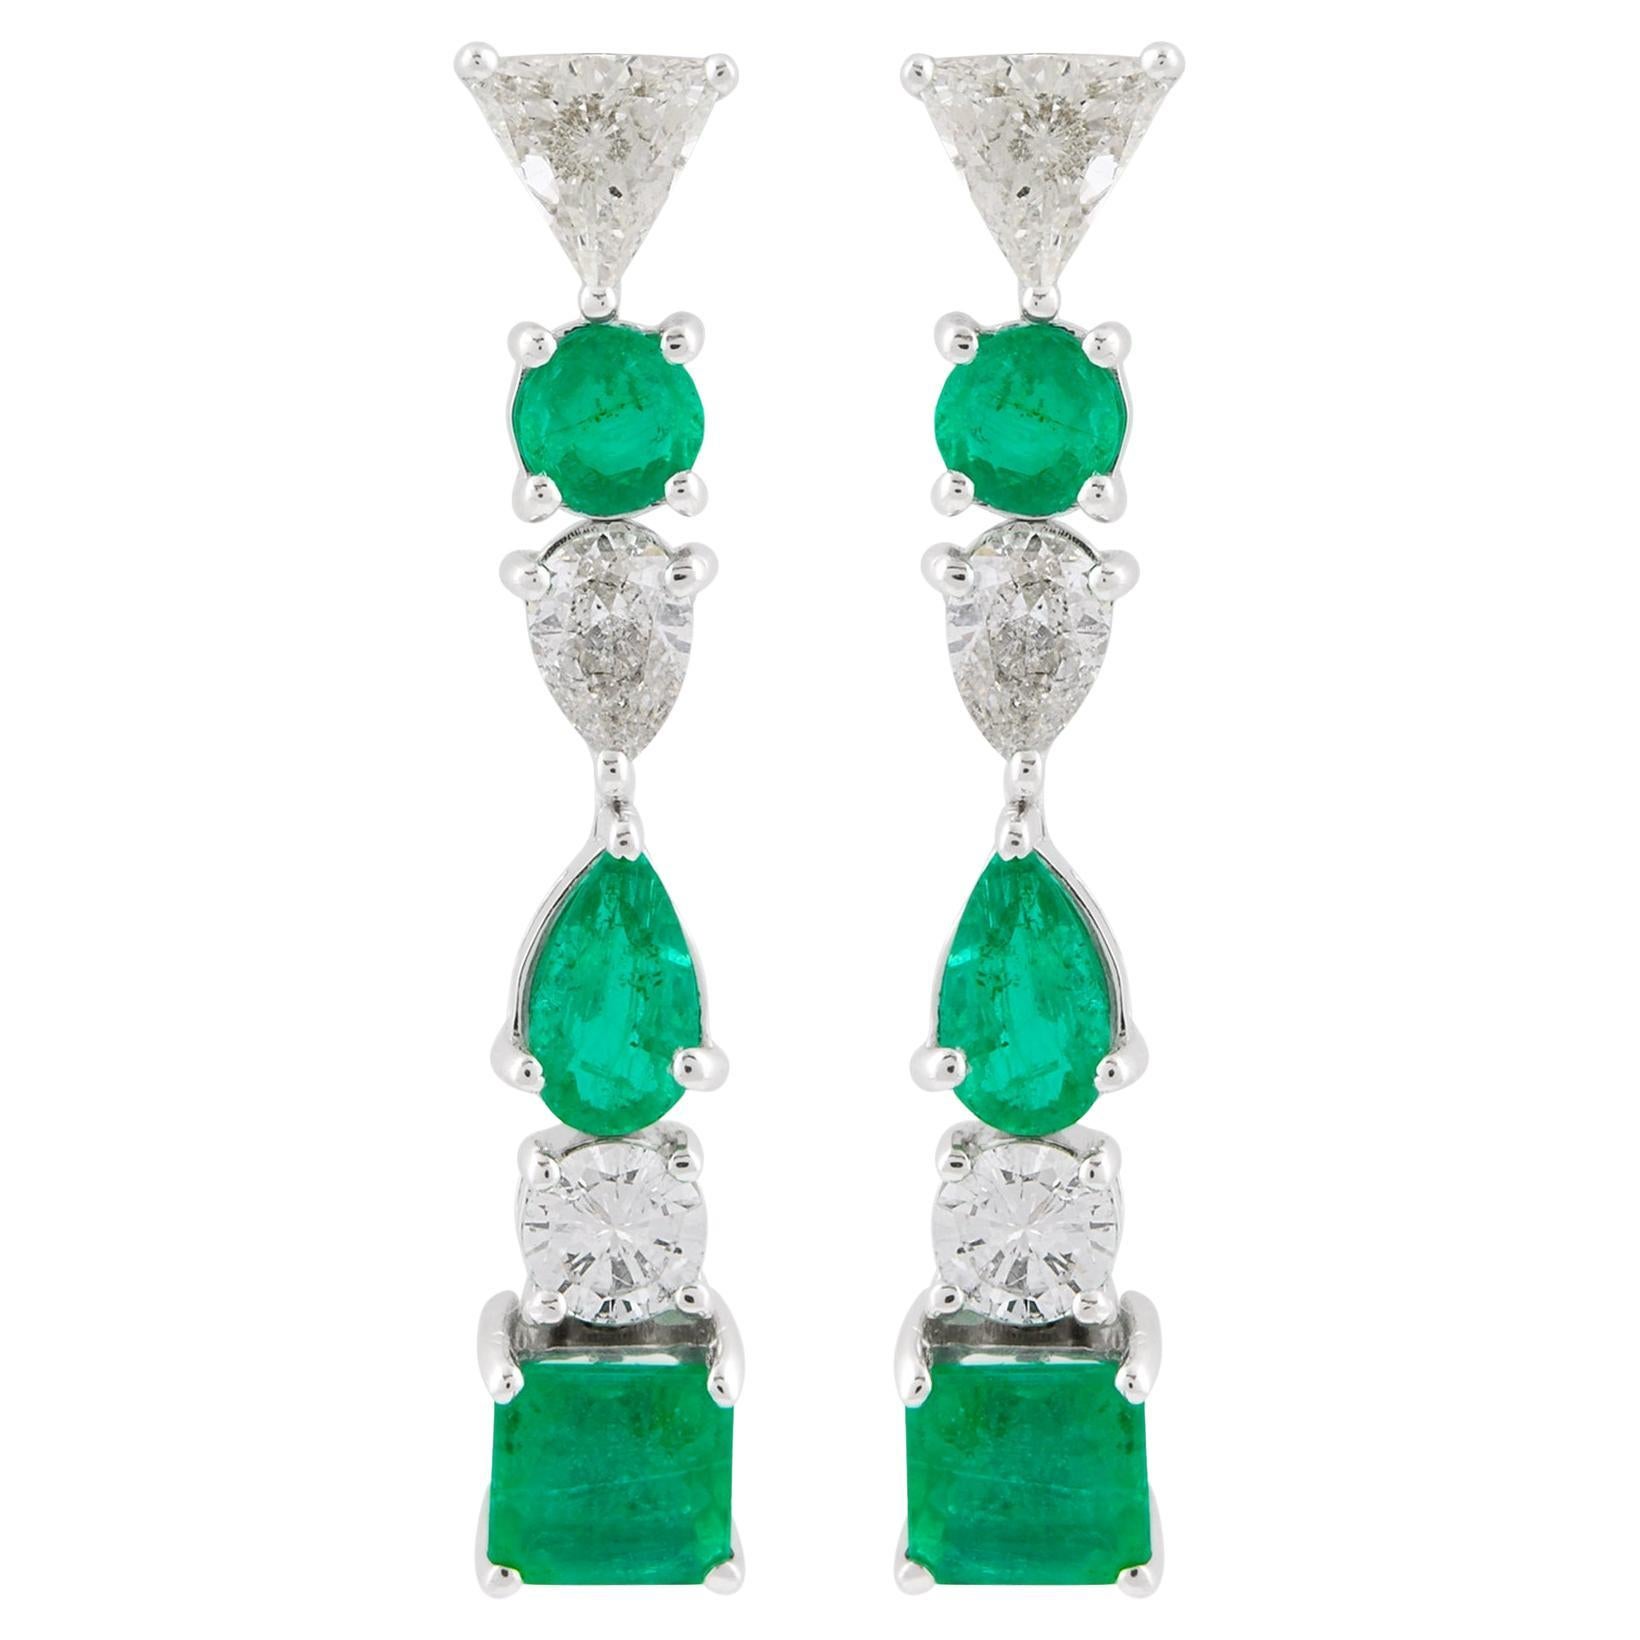 Item Code :- SEE-11788A (14k)
Gross Weight :- 4.33 gm
14k White Gold Weight :- 3.58 gm
Diamond Weight :- 1.35 carat  ( AVERAGE DIAMOND CLARITY SI1-SI2 & COLOR H-I )
Emerald Weight :- 2.40 carat
Earrings Length :- 31 mm approx.

✦